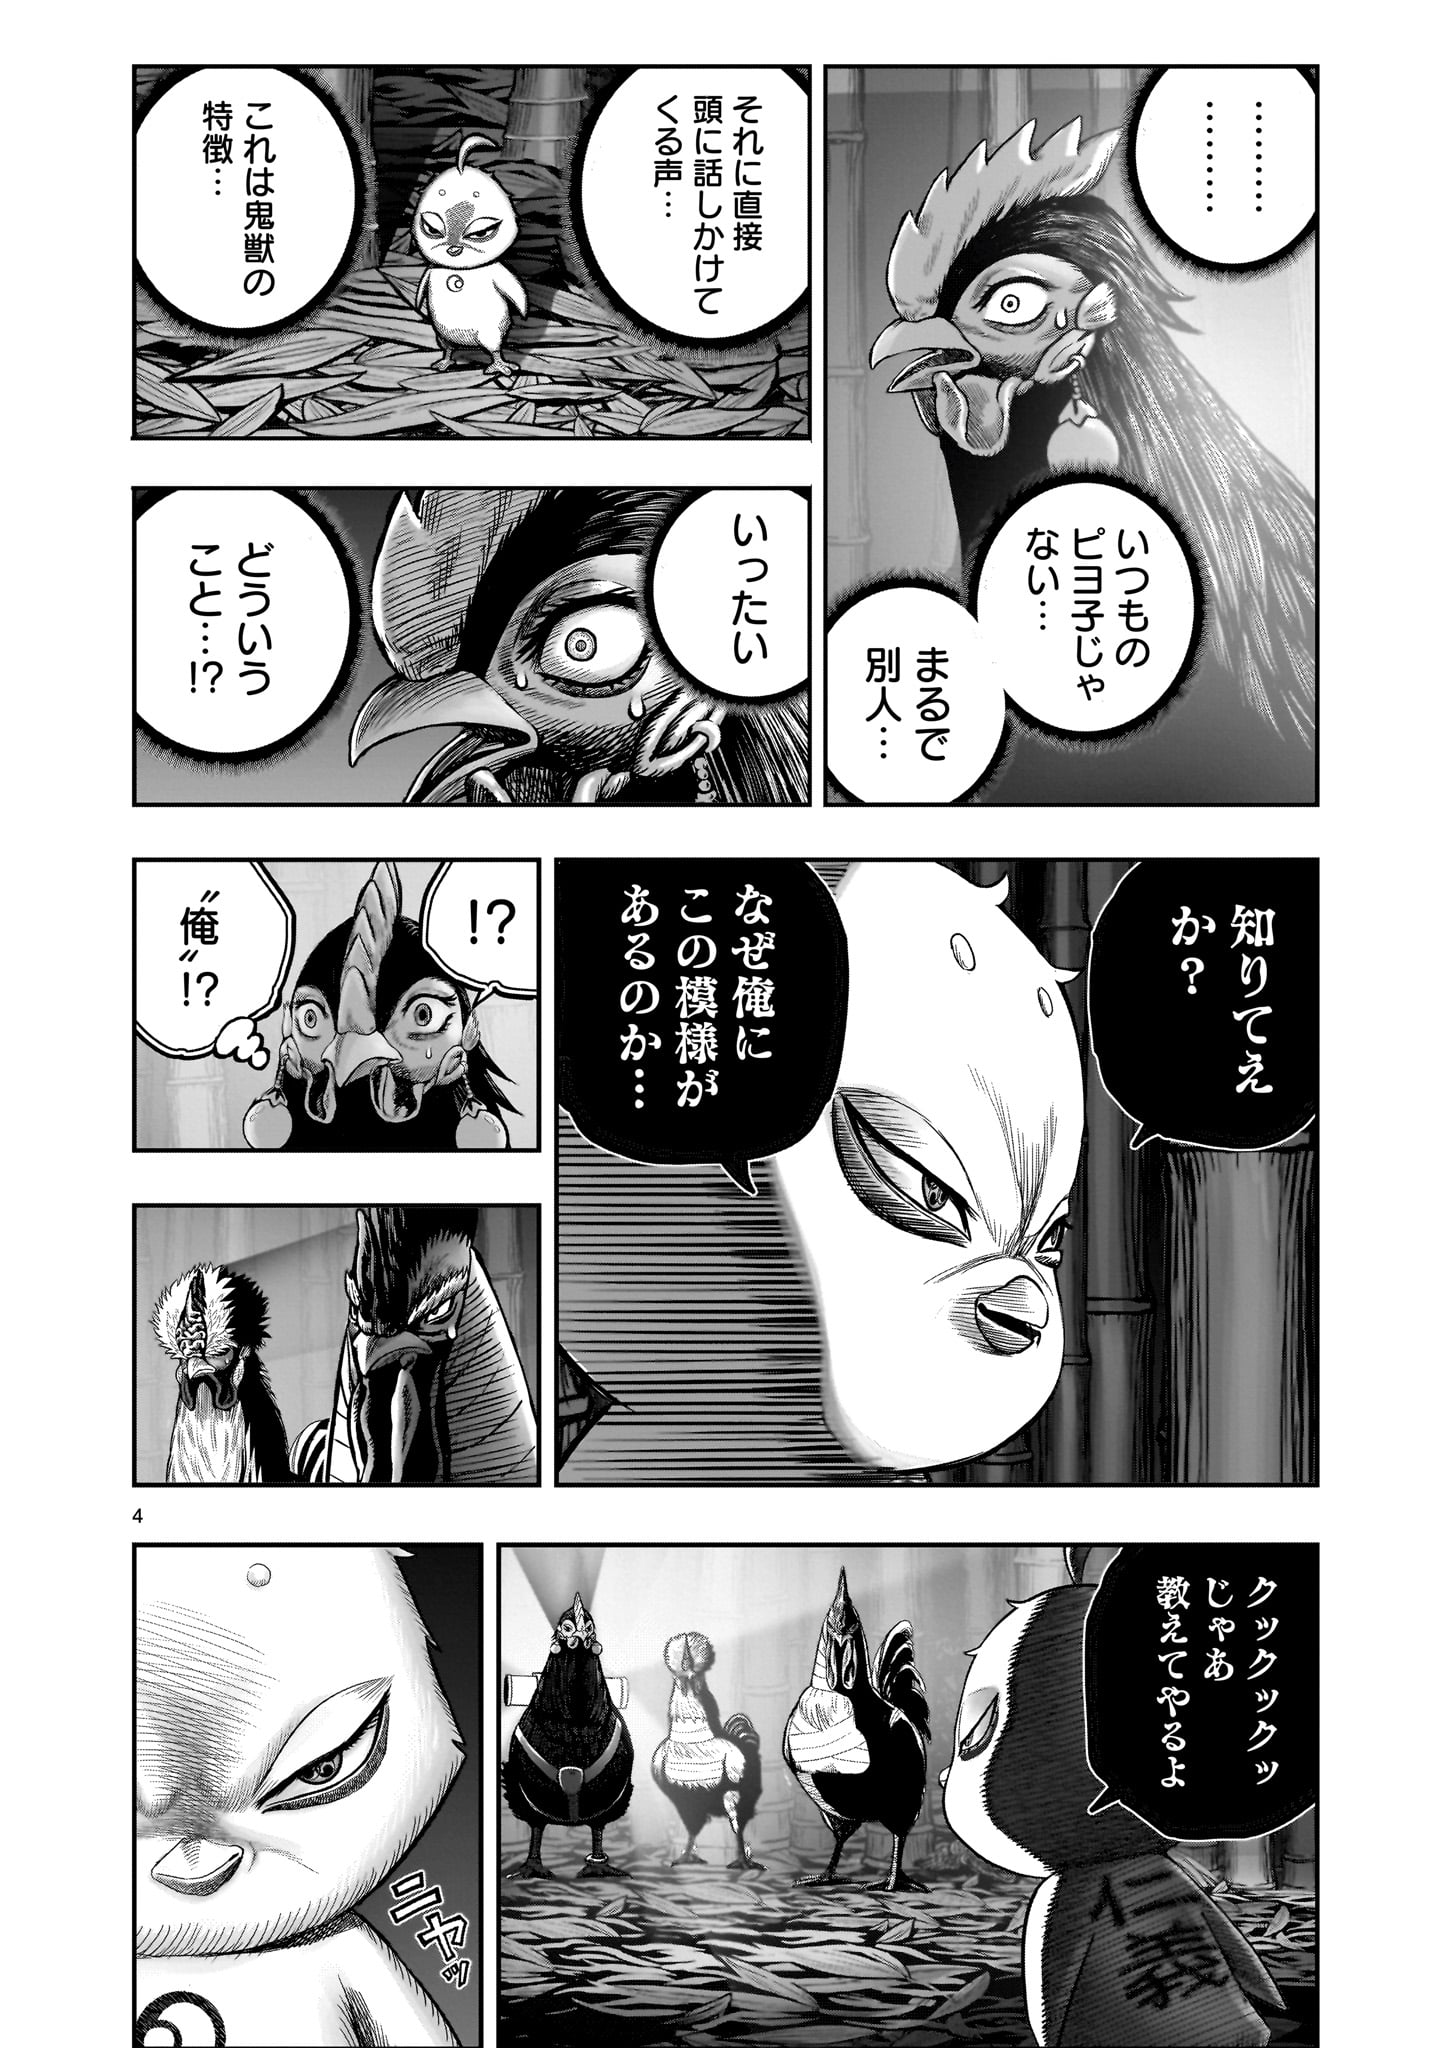 Niwatori Fighter - Chapter 33 - Page 4